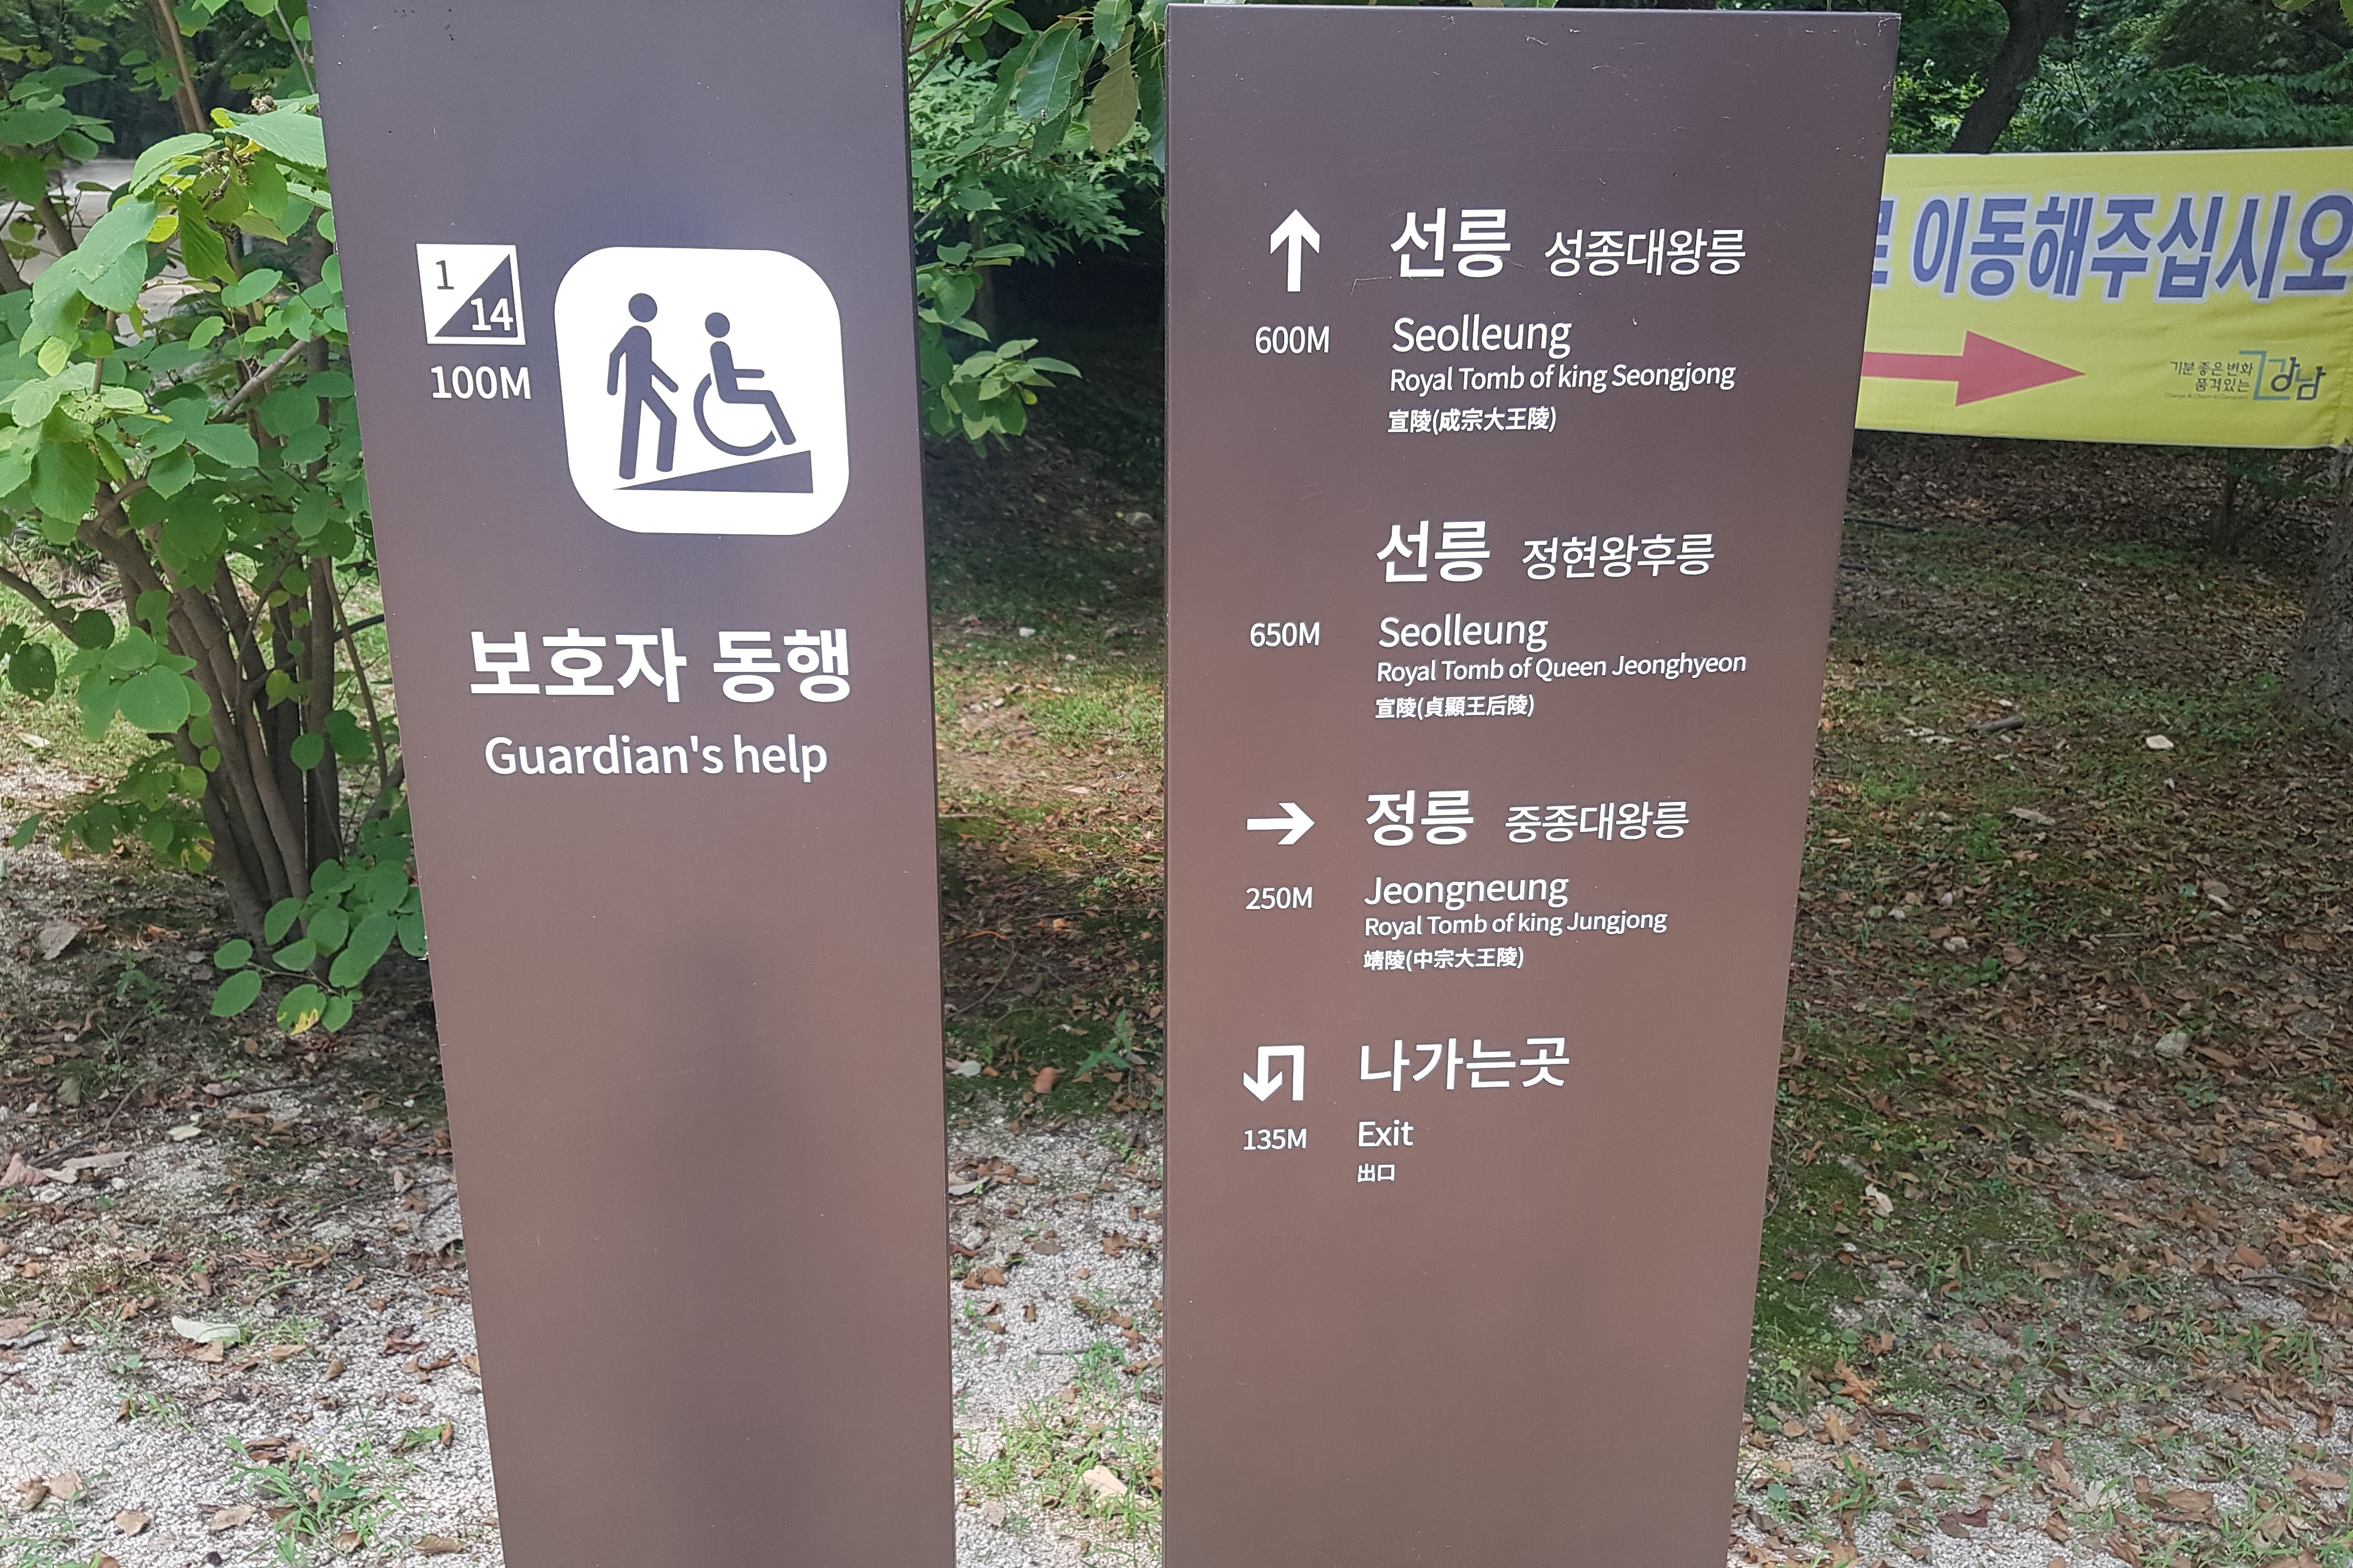 Guide map and information desk0 : Guide map of Seolleung and Jeongneung Royal Tombs 1
